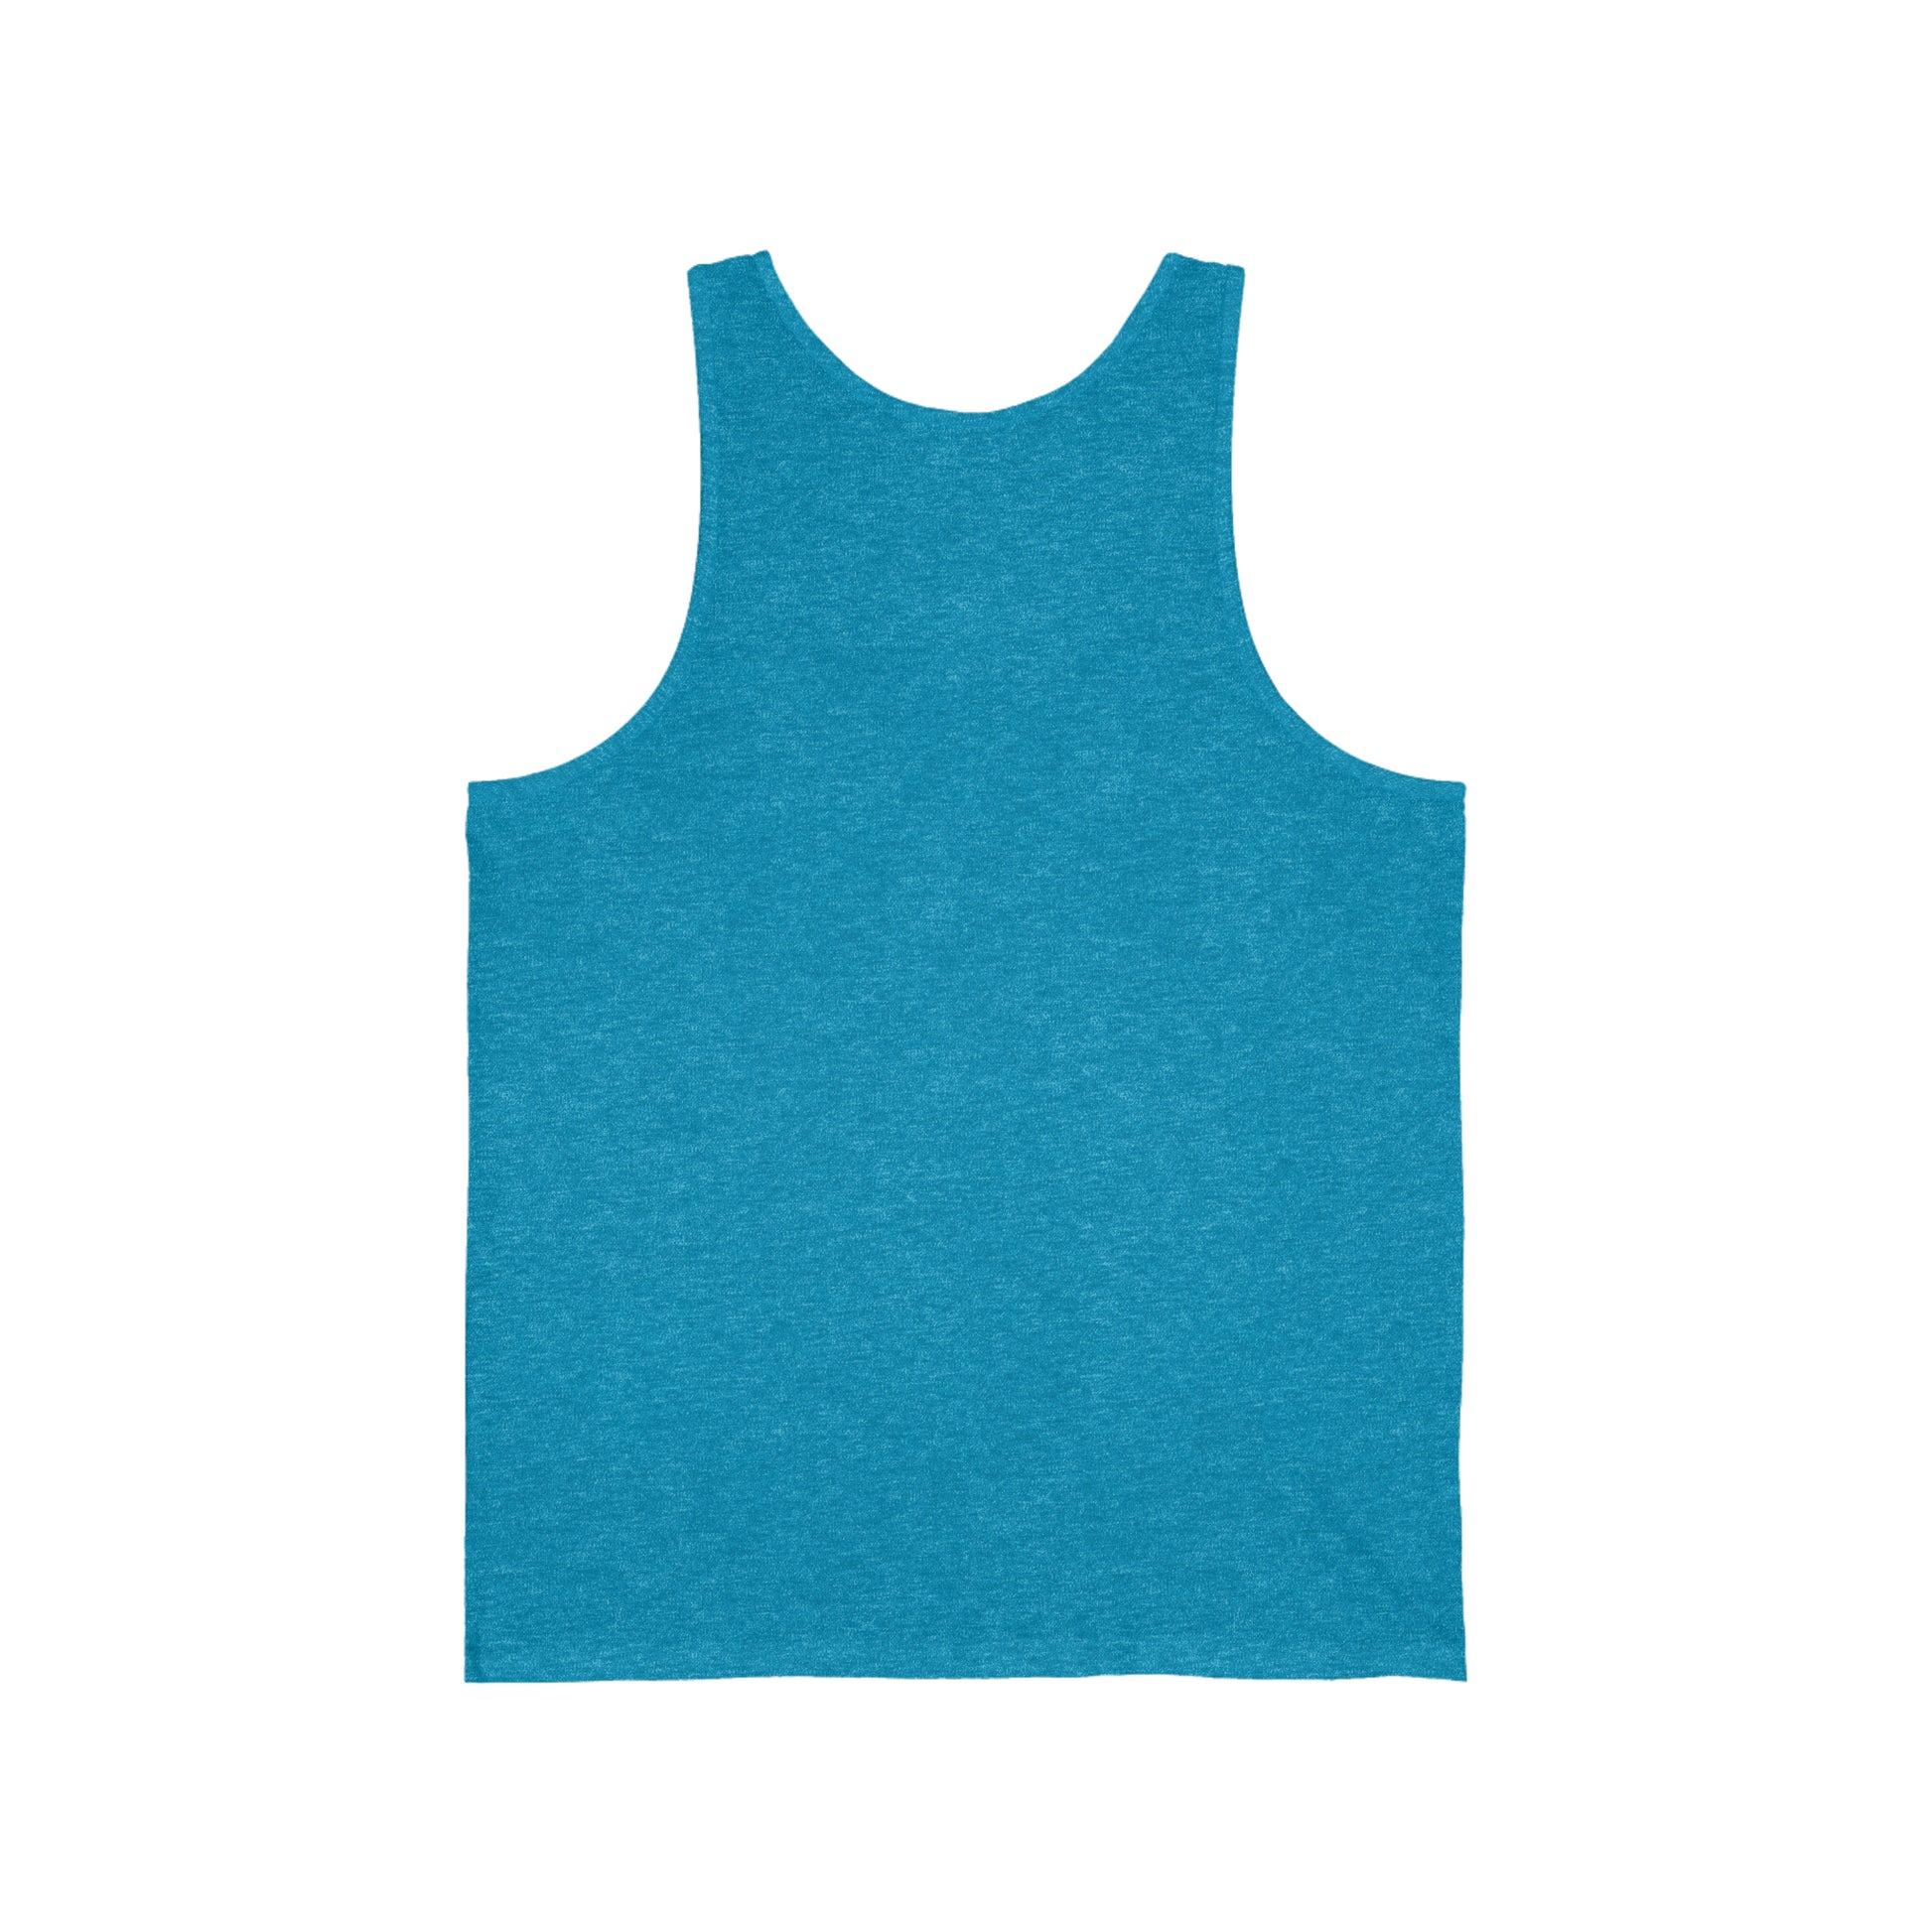 A Printify Unisex Jersey Tank in plain blue on a white background, purchased in Cabbagetown, Toronto.